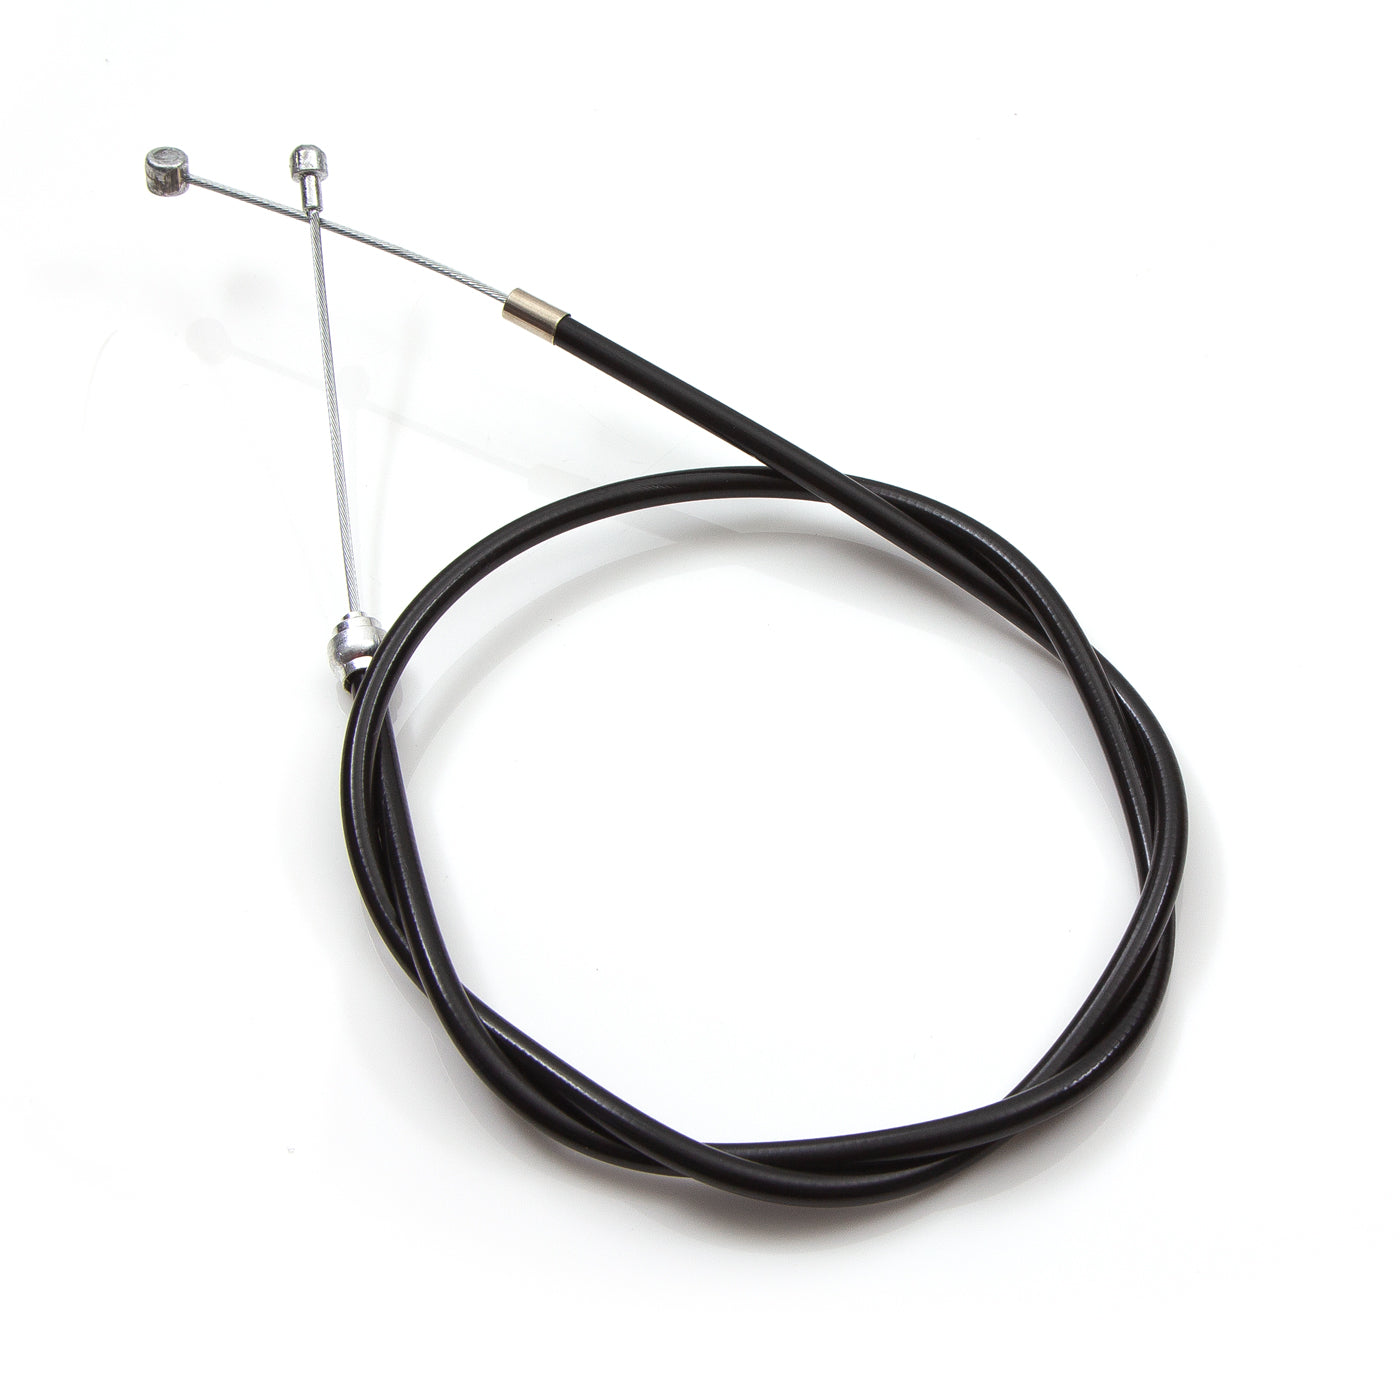 View Clarks Brake Cable Road and Hybrid Bikes Front Rear Front Rear Front Brake information